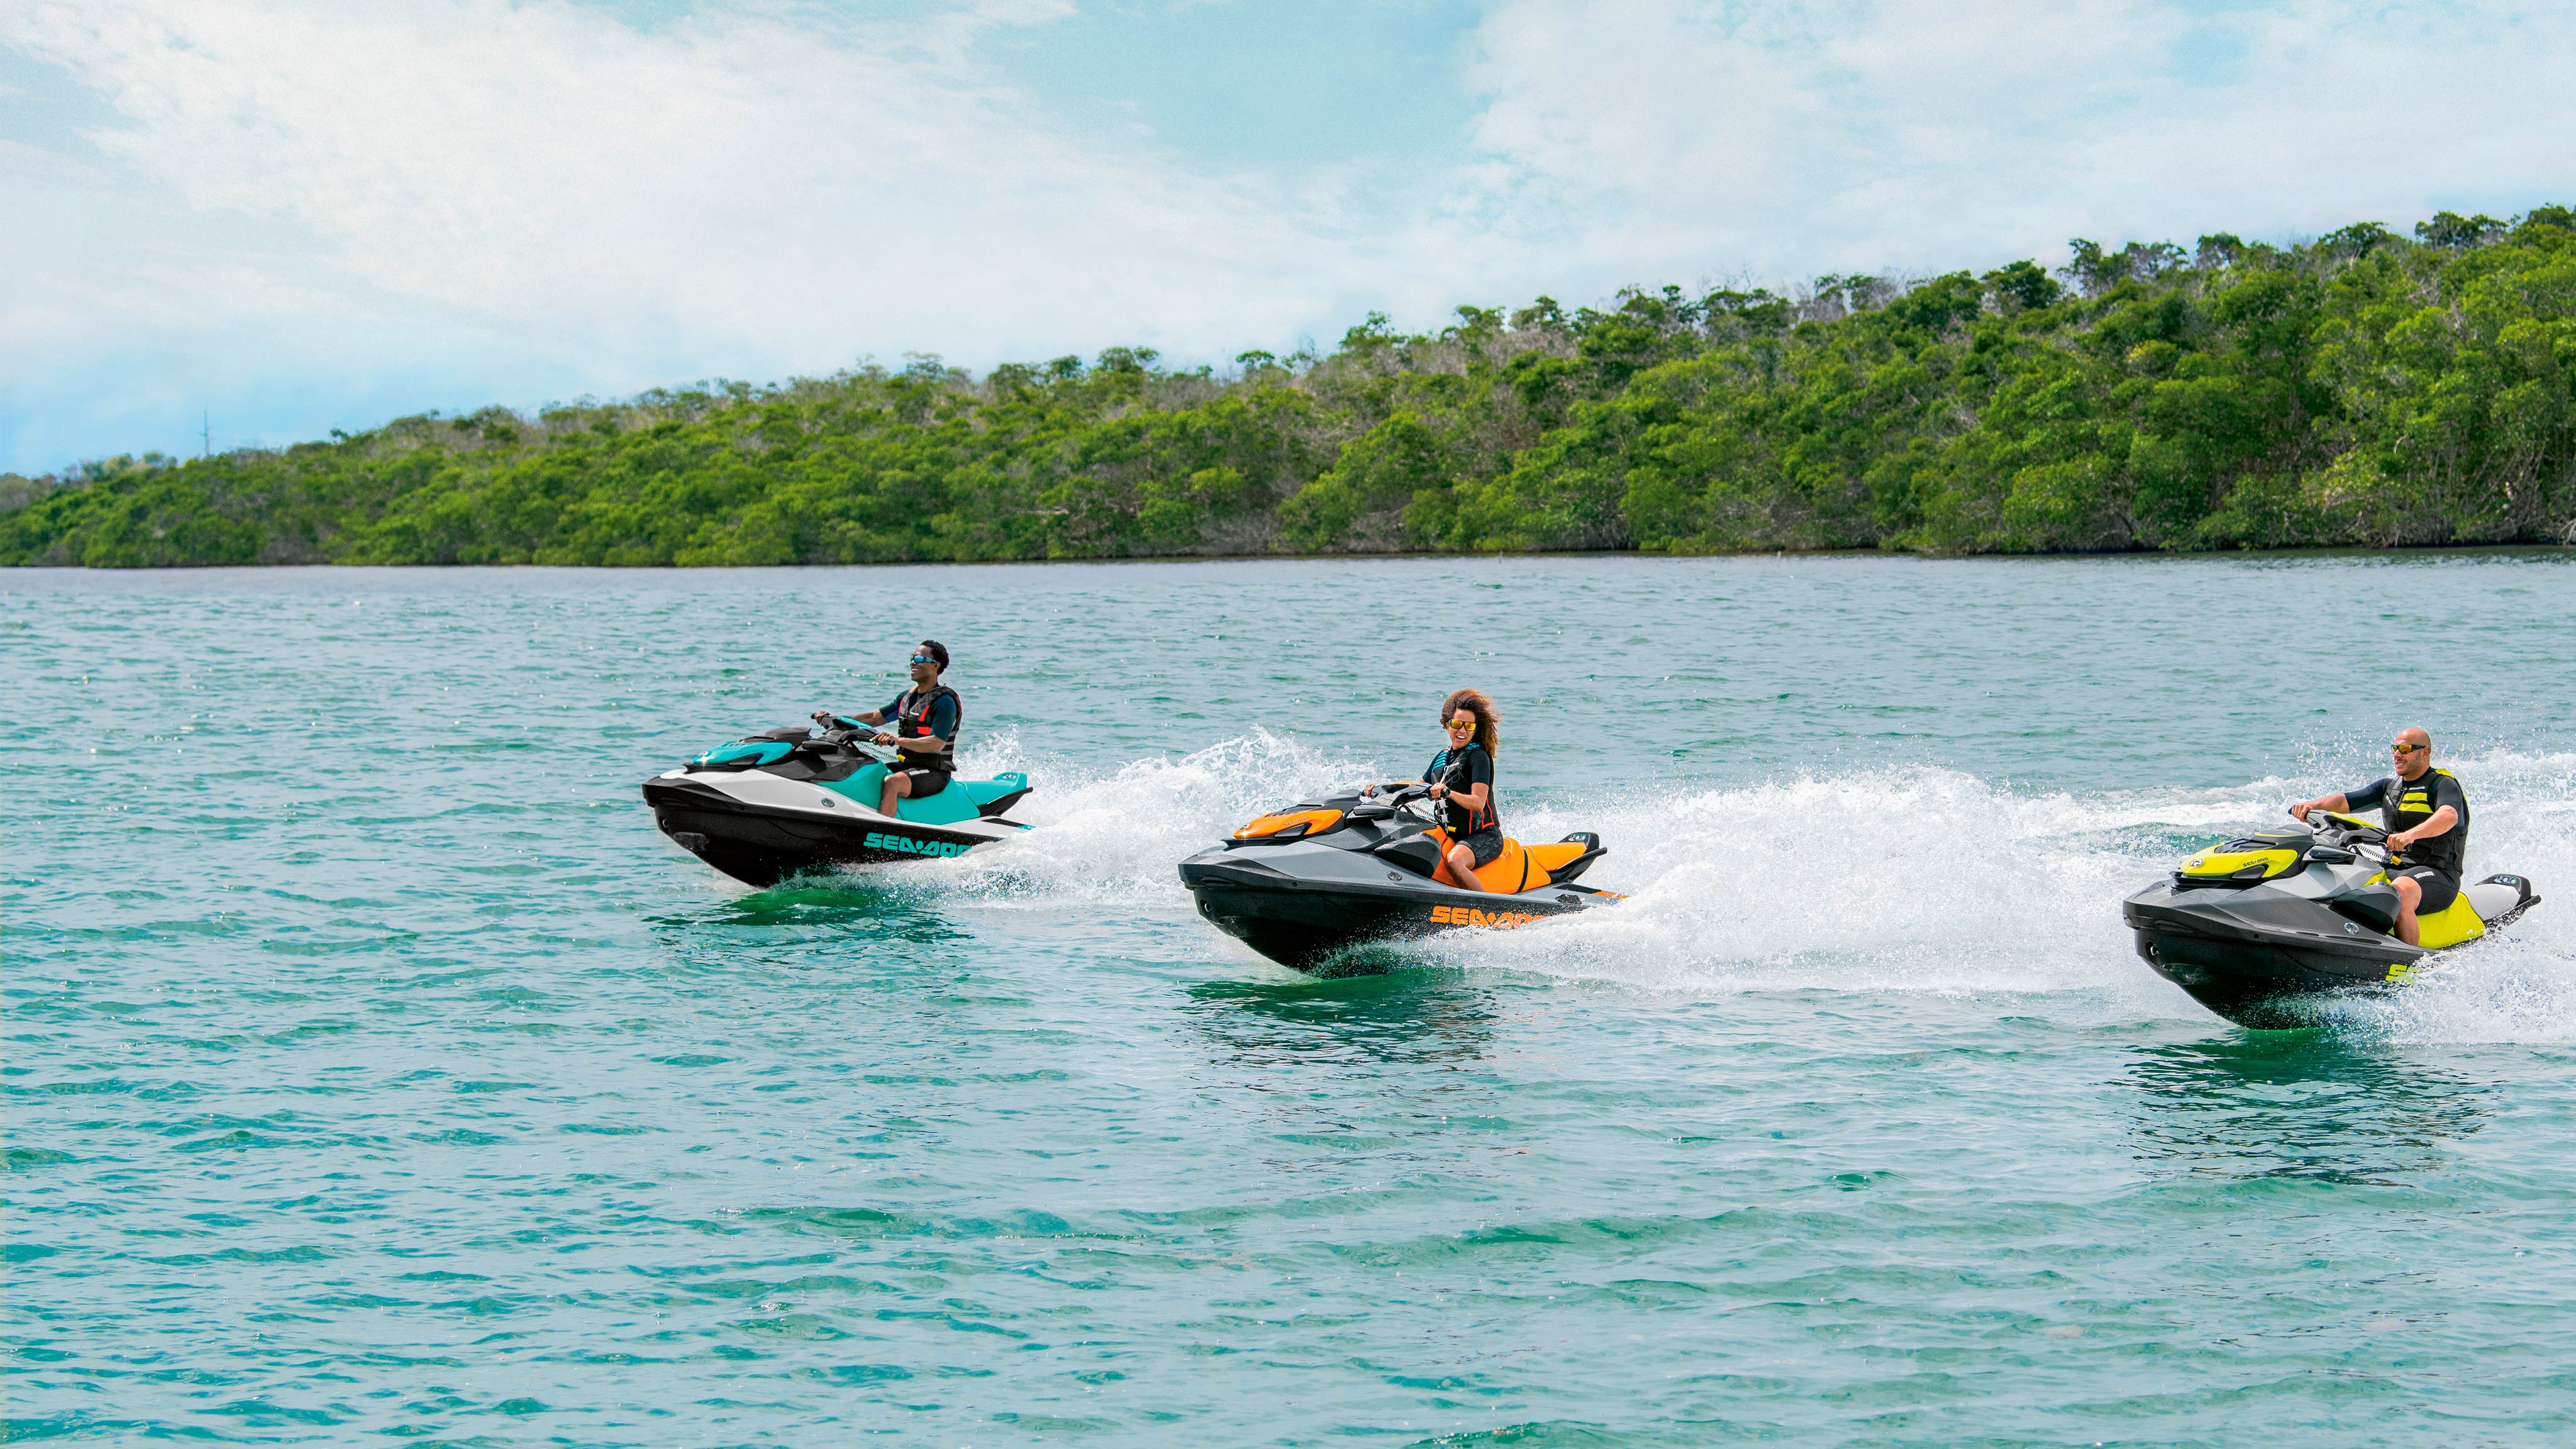 A man and a woman riding a Sea-Doo GTI